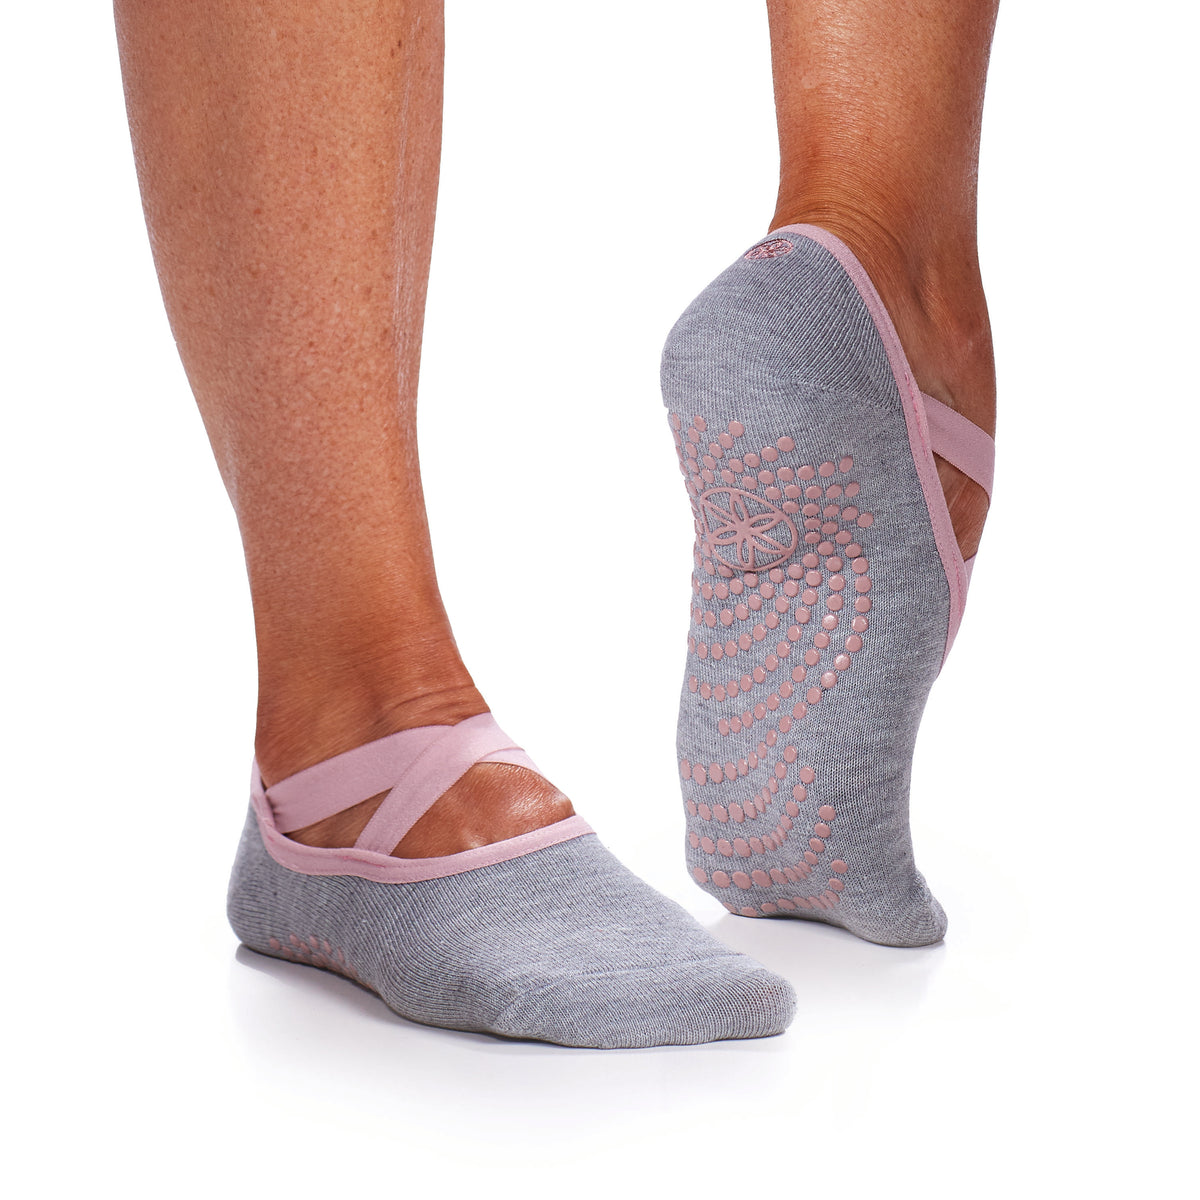 Barre And Bubbles Socks – Fit For Barre